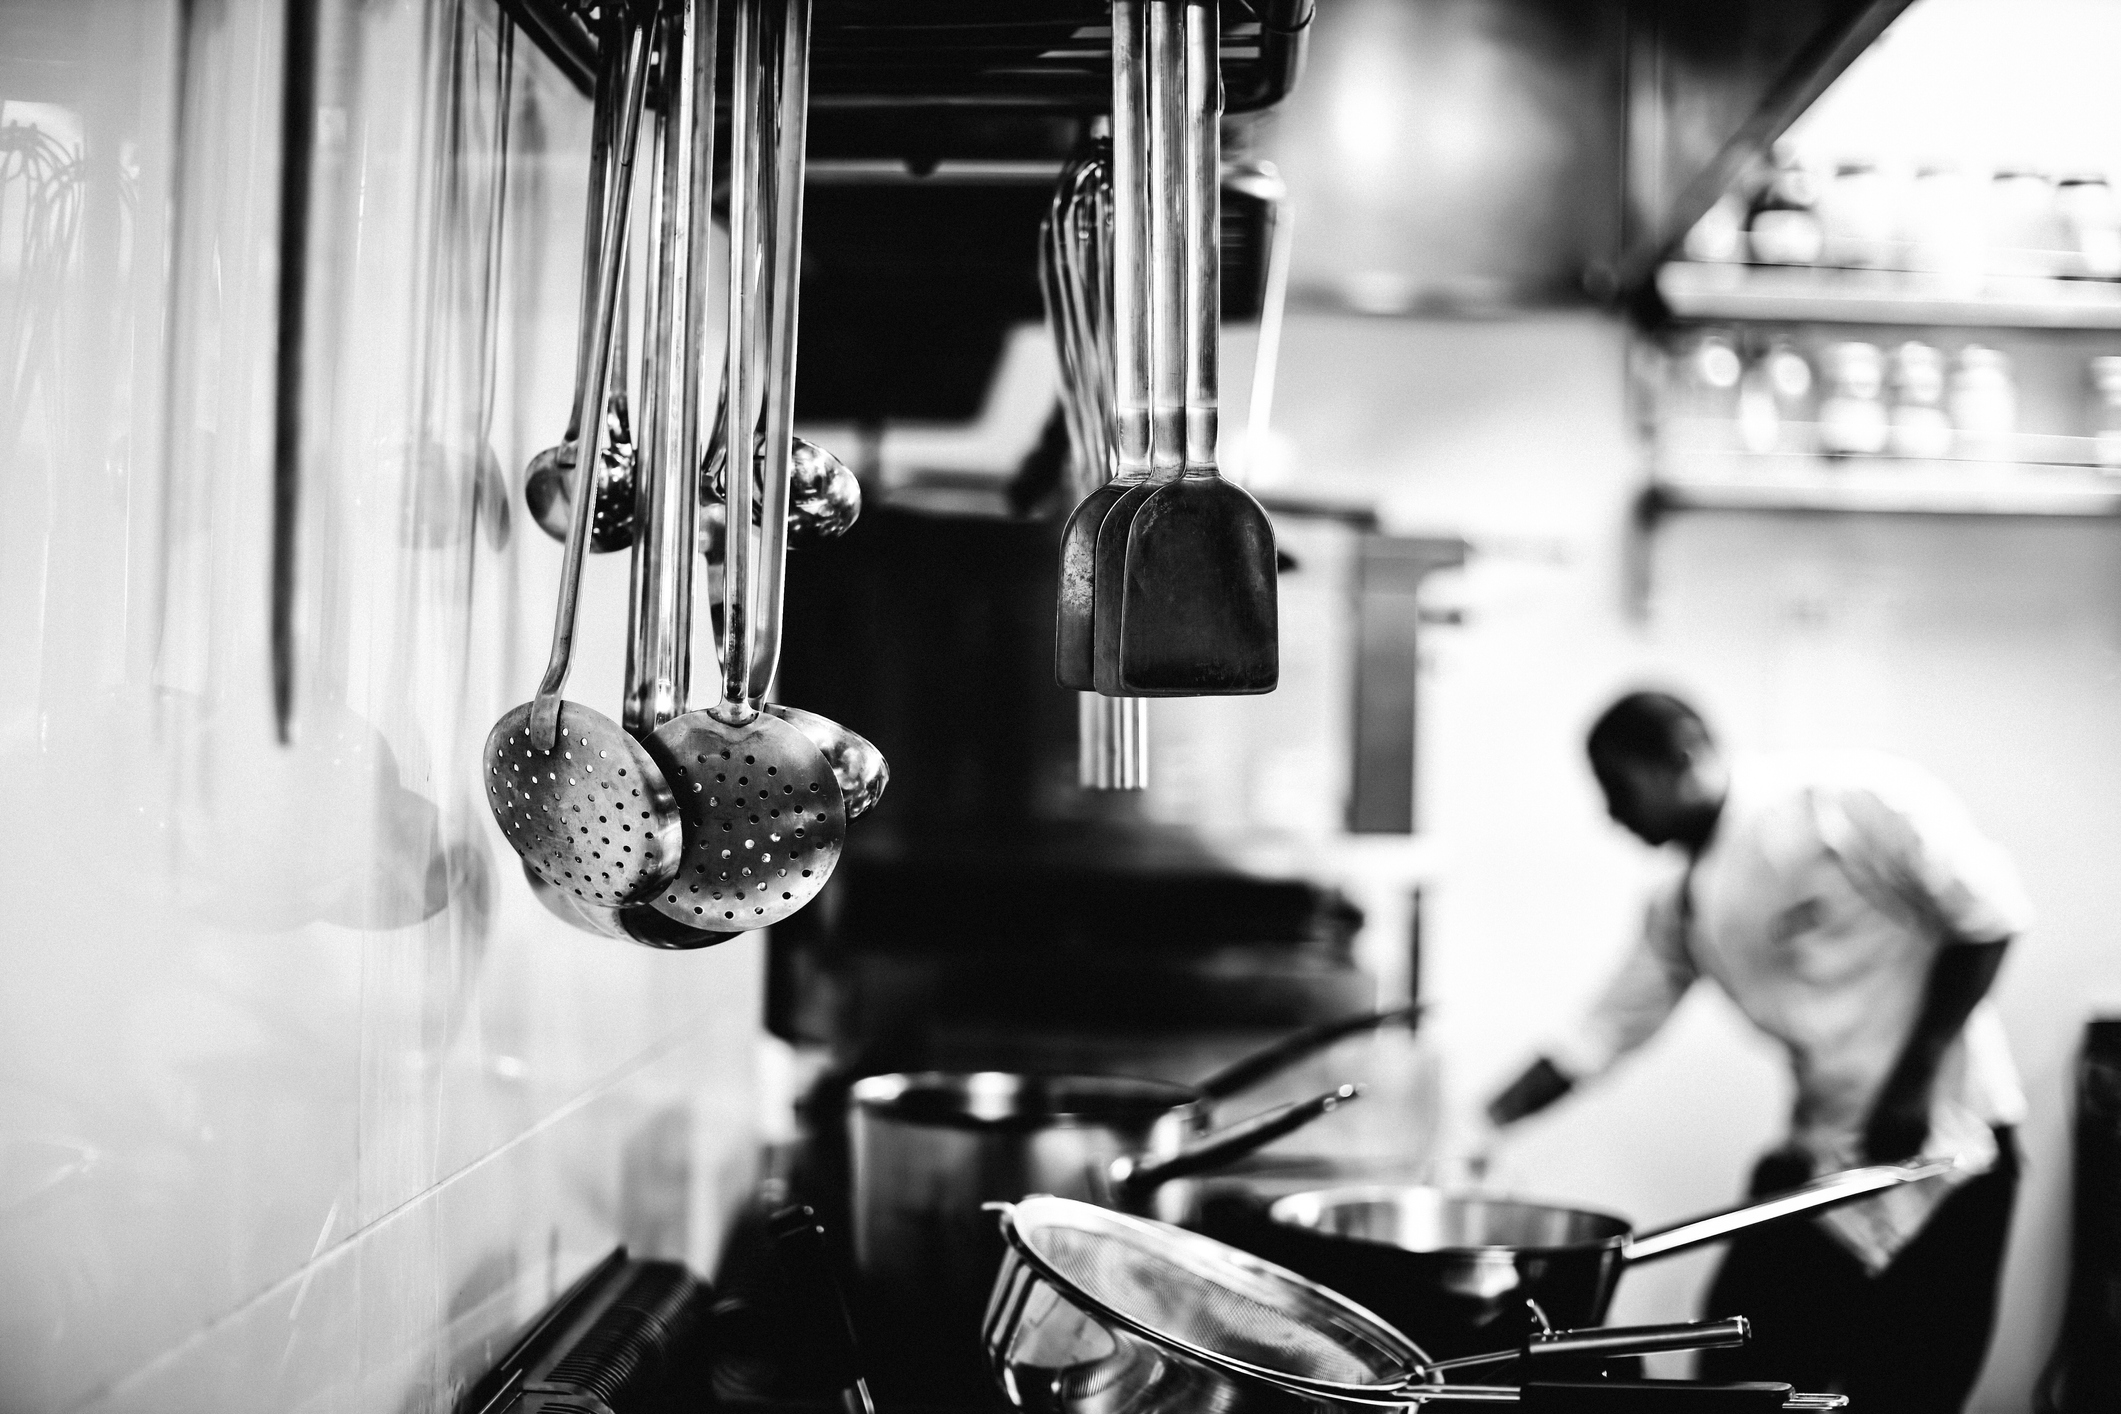 Two chefs at work in a kitchen